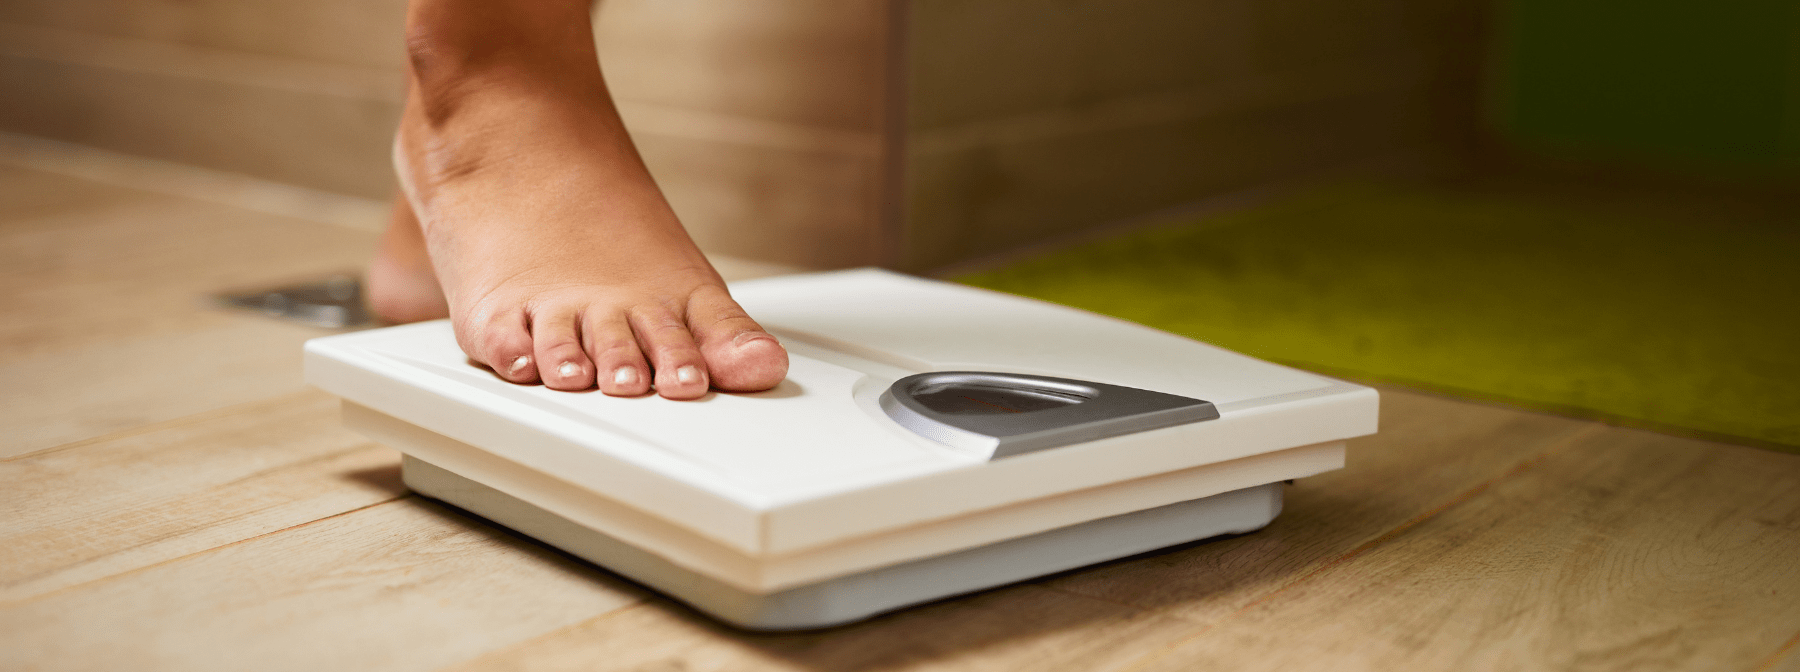 Why The Scale Won’t Go Down